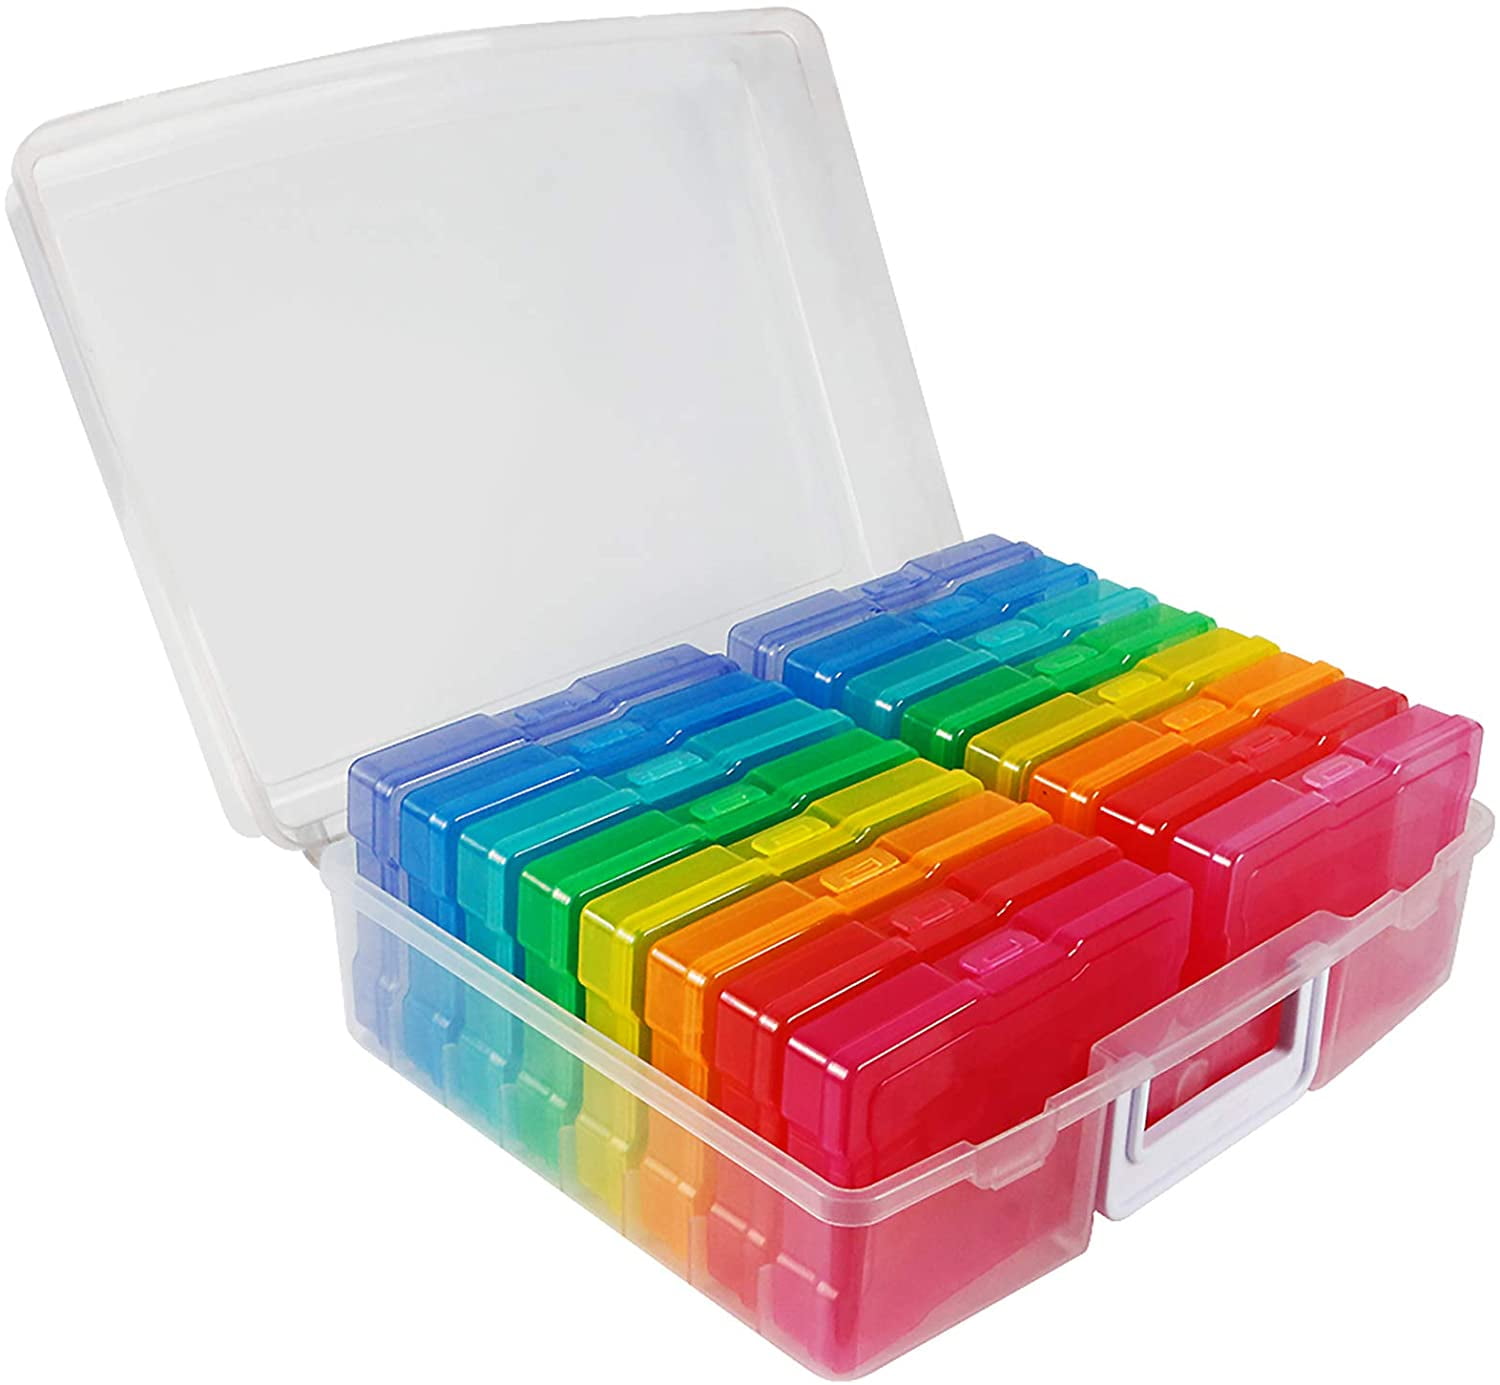 Transparent 4 x 6 Photo Cases and Clear Craft Keeper with Handle - 16  Inner Cases Plastic Storage Container Box (Multi-Colored) 